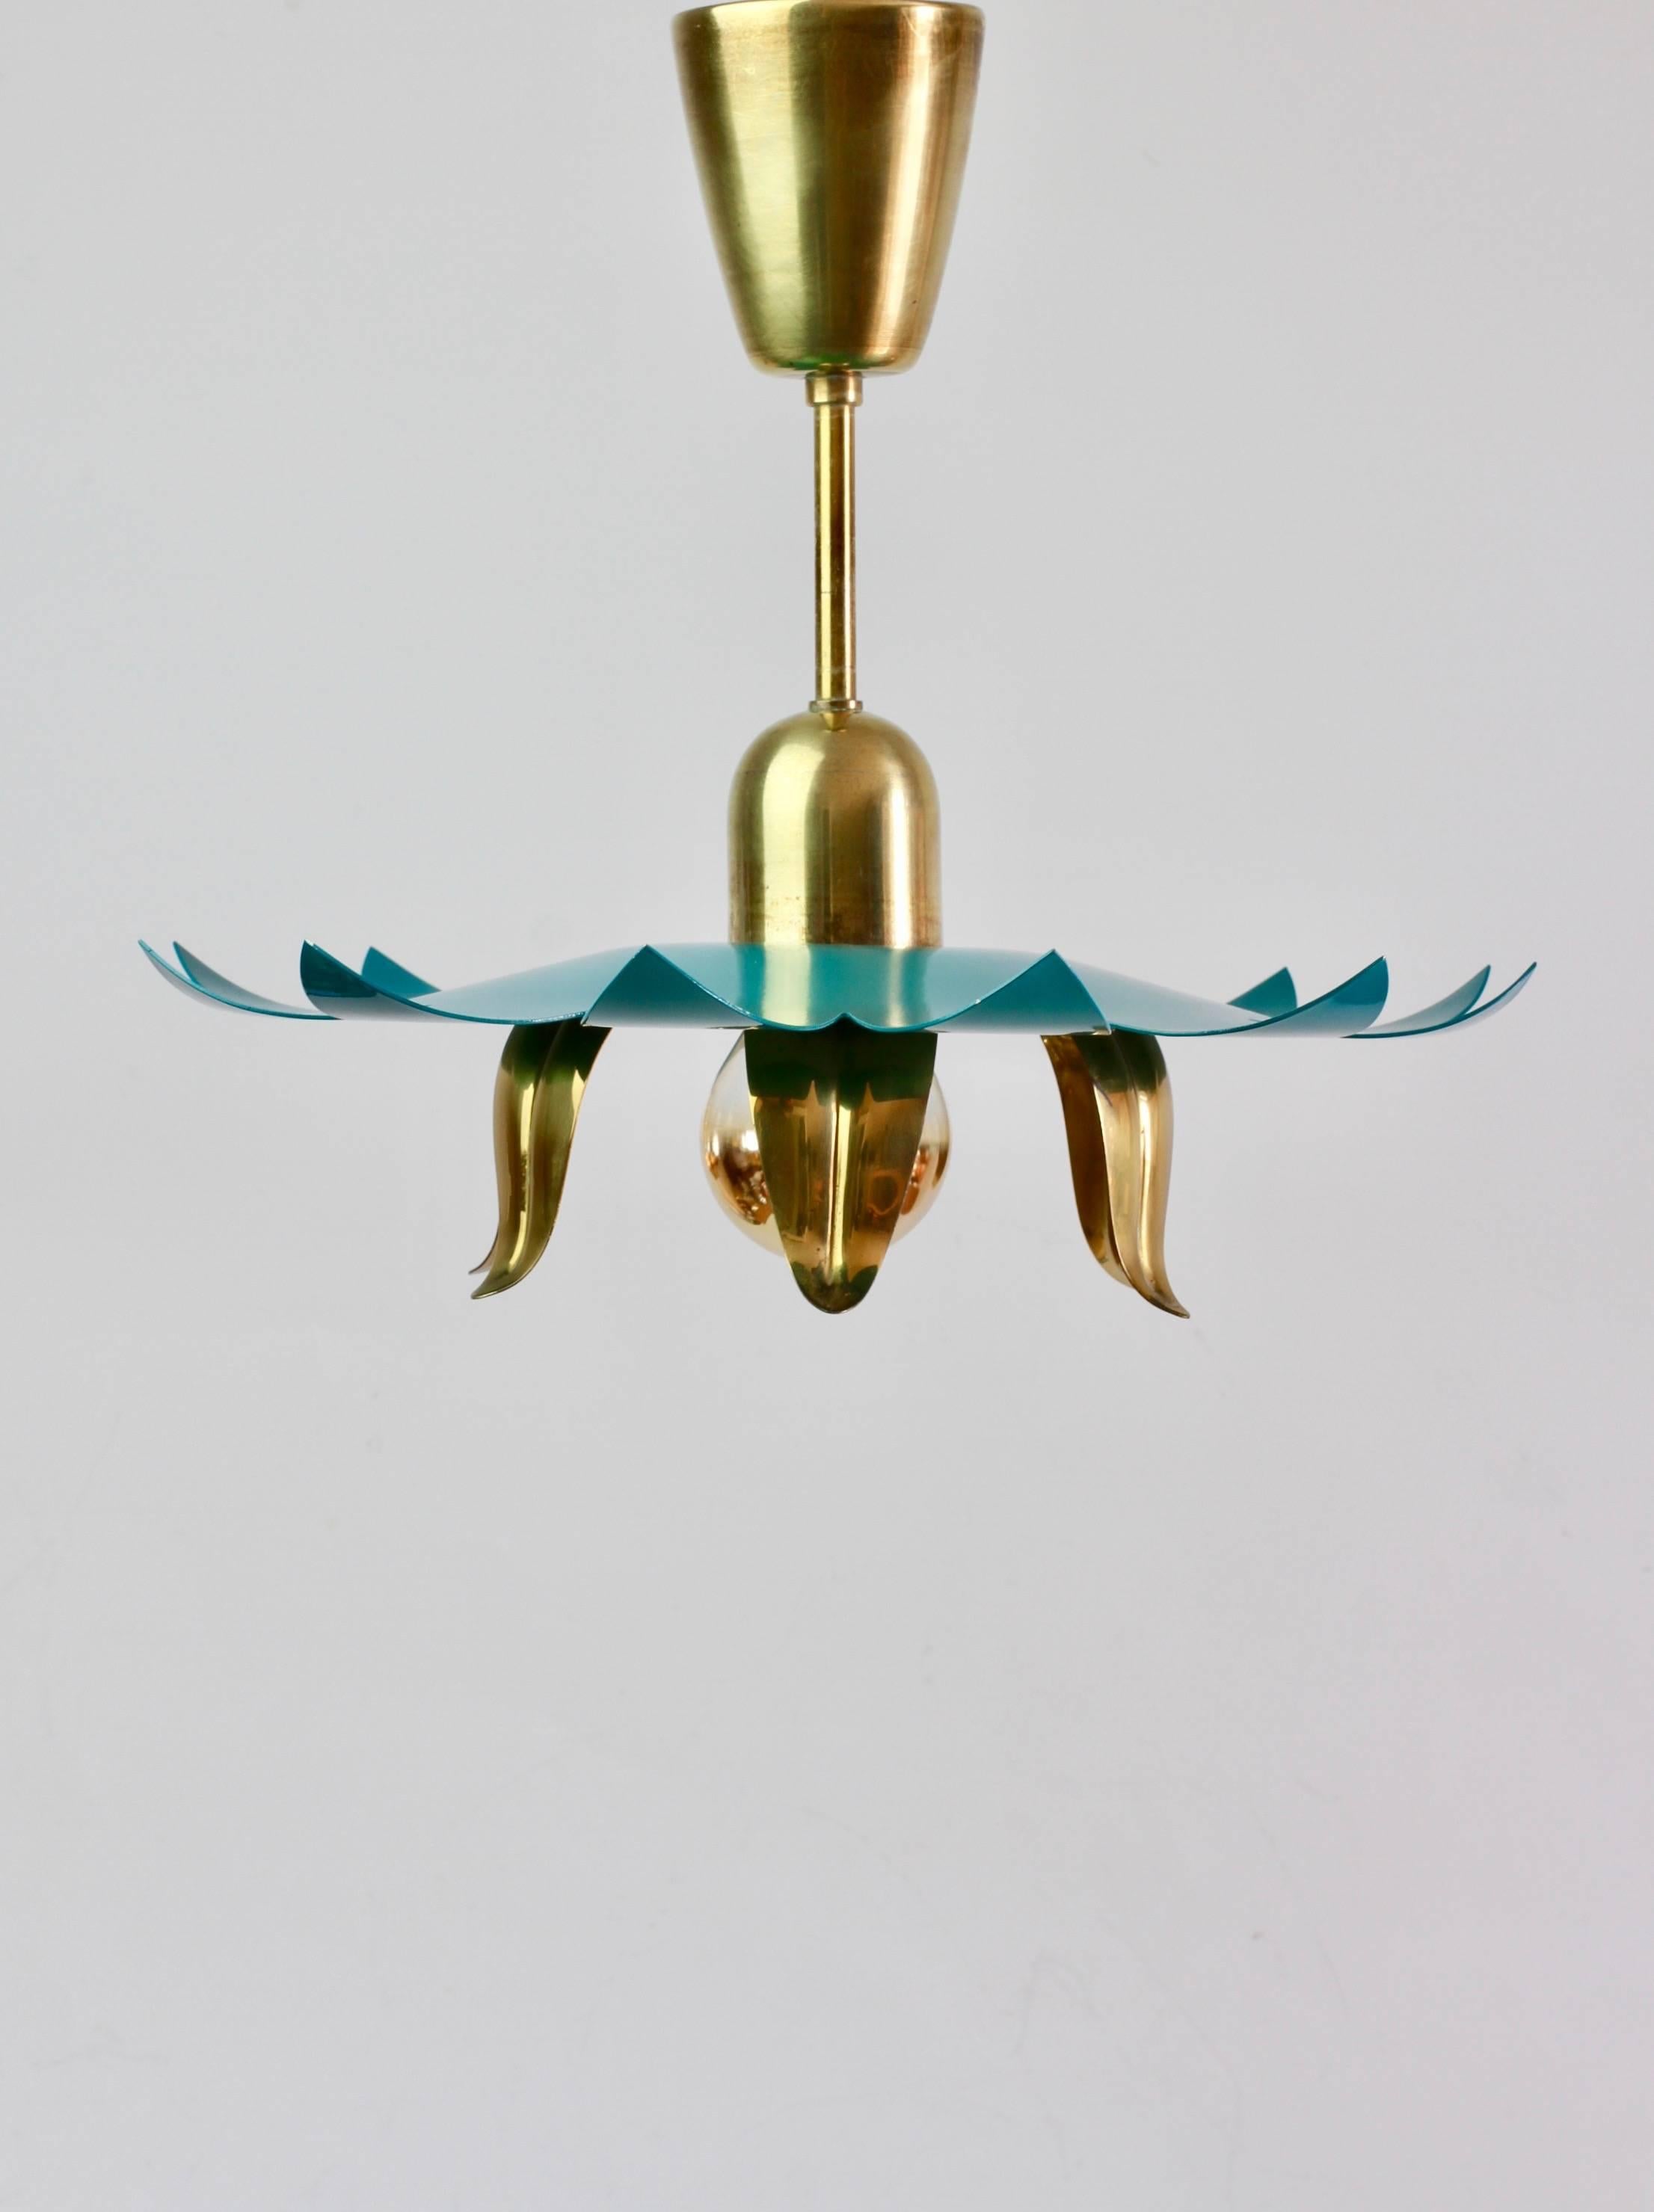 Wonderful, whimsical and fun 1950s pendant light attributed to/in the style of midcentury Italian lighting design firm Stilnovo. Made of polished brass with a slight patina to it and featuring a turquoise colored 